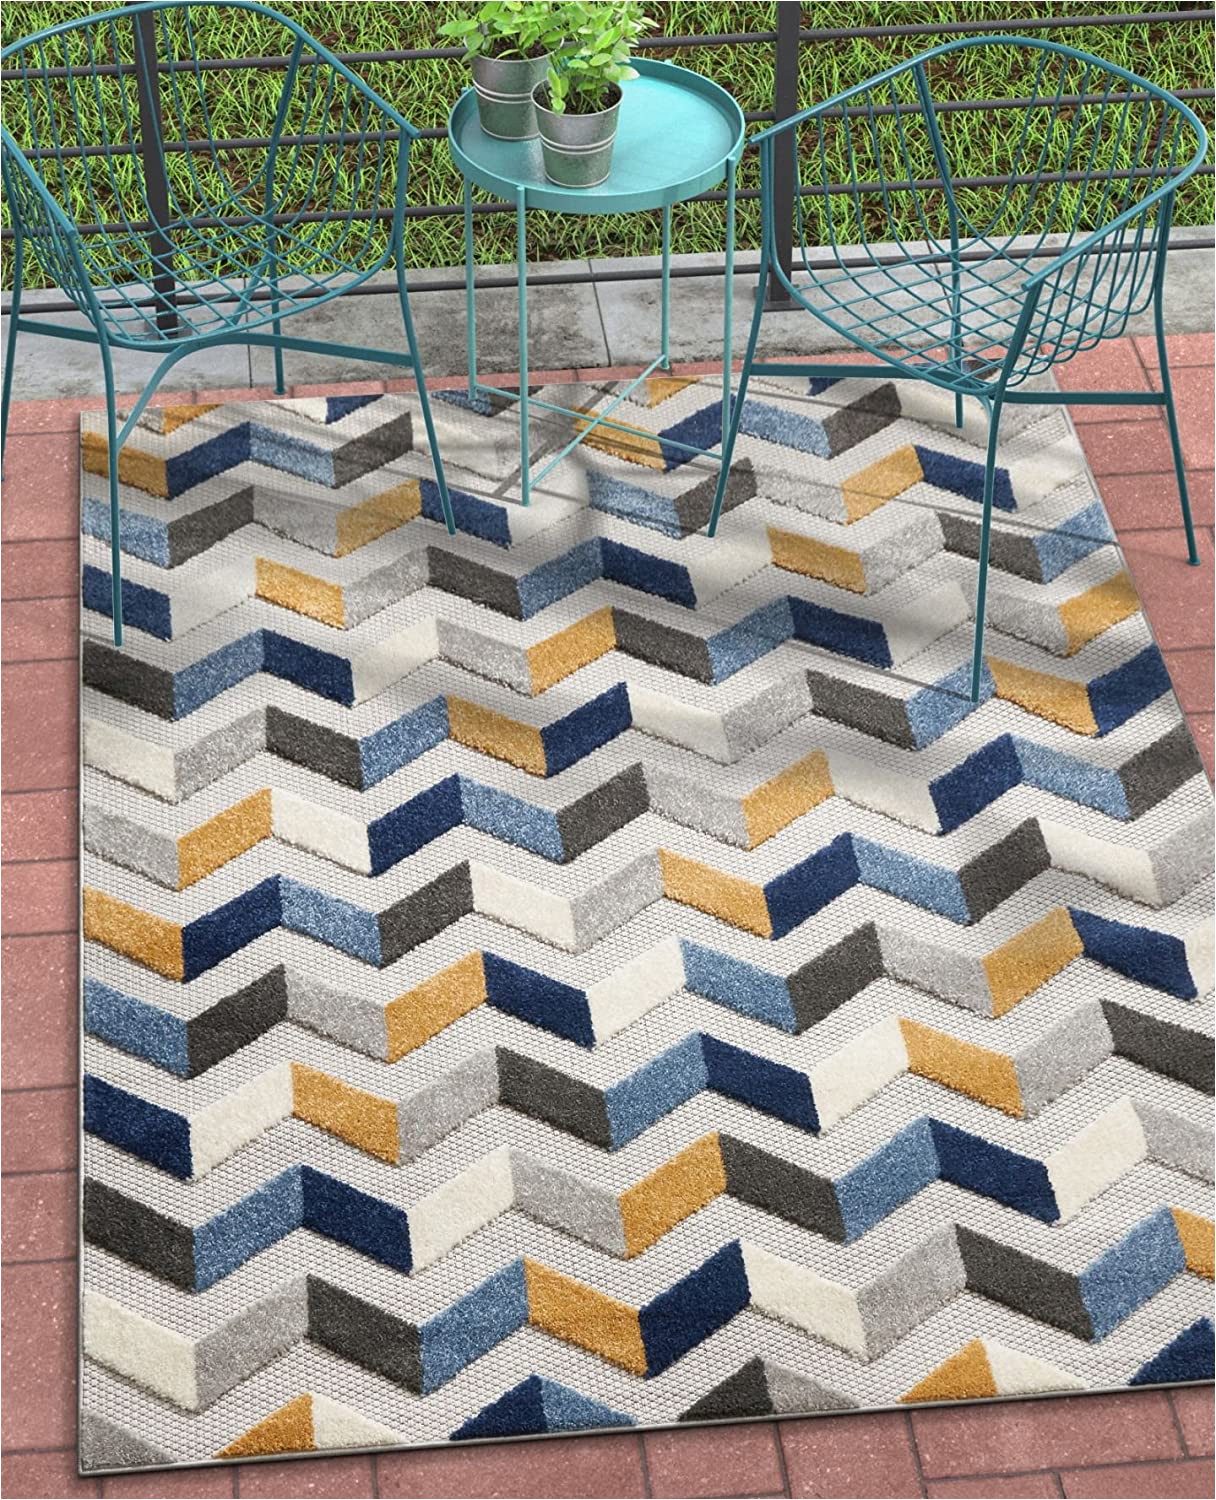 Amazon Prime Outdoor area Rugs Well Woven Maui Blue Indoor Outdoor Chevron area Rug 5×7 5 3" X 7 3" High Traffic Stain Resistant Modern Geometric Carpet